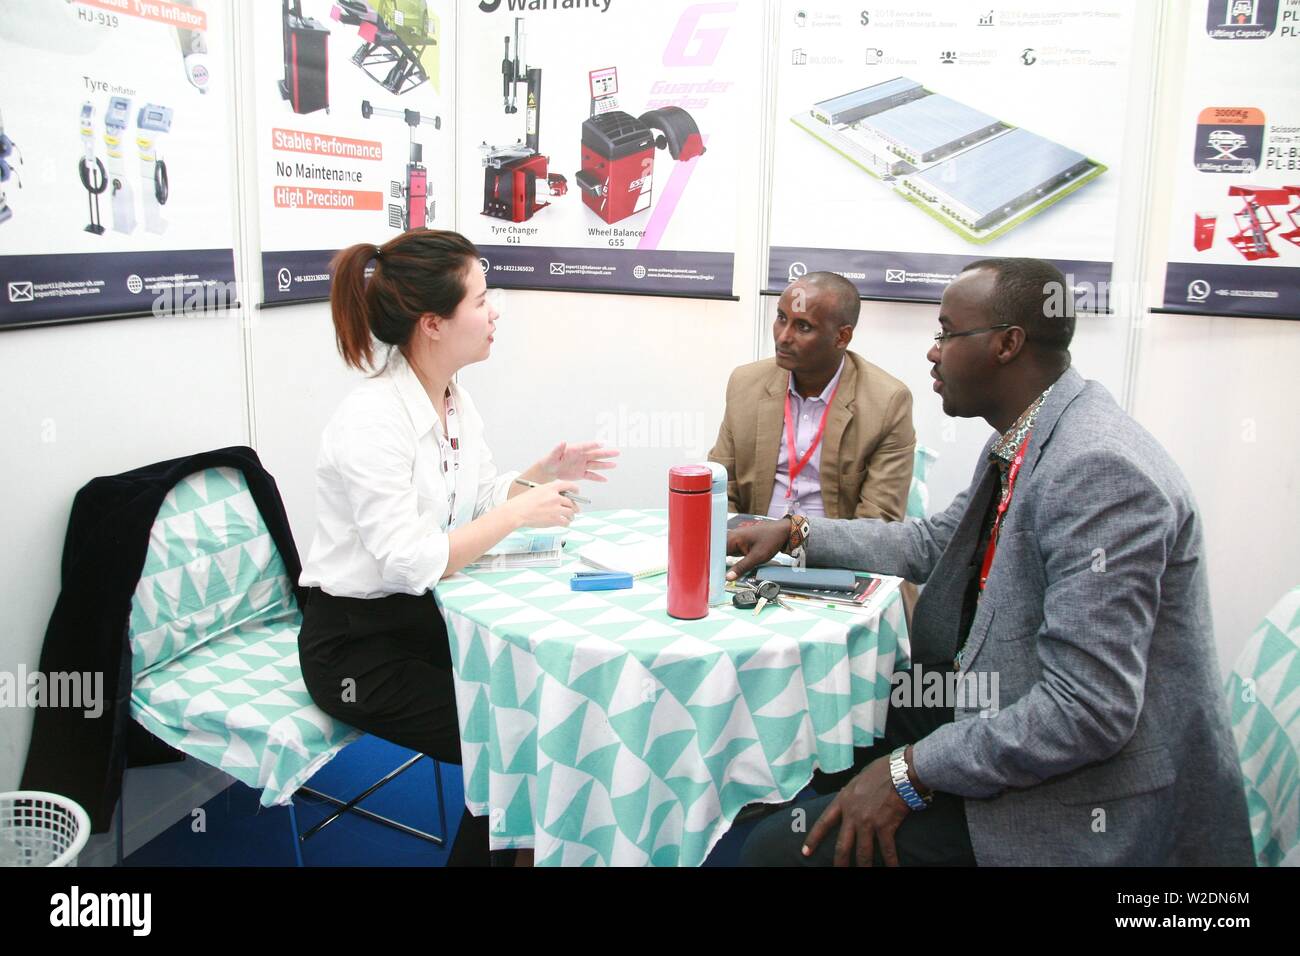 (190708) -- BEIJING, July 8, 2019 (Xinhua) -- A trader (L) converses with customers during the 5th Edition of China Trade Week at Kenyatta International Convention Center (KICC) in Nairobi, capital of Kenya, June 7, 2019. China Trade week is a series of successful Business-to-Business (B2B) and Business-to-Government (B2G) trade platforms across the Middle East and Africa covering multiple industries including building and construction materials, lighting, furniture and interior, technology, agriculture, textiles and auto parts. (Xinhua/Charles Onyango) Stock Photo